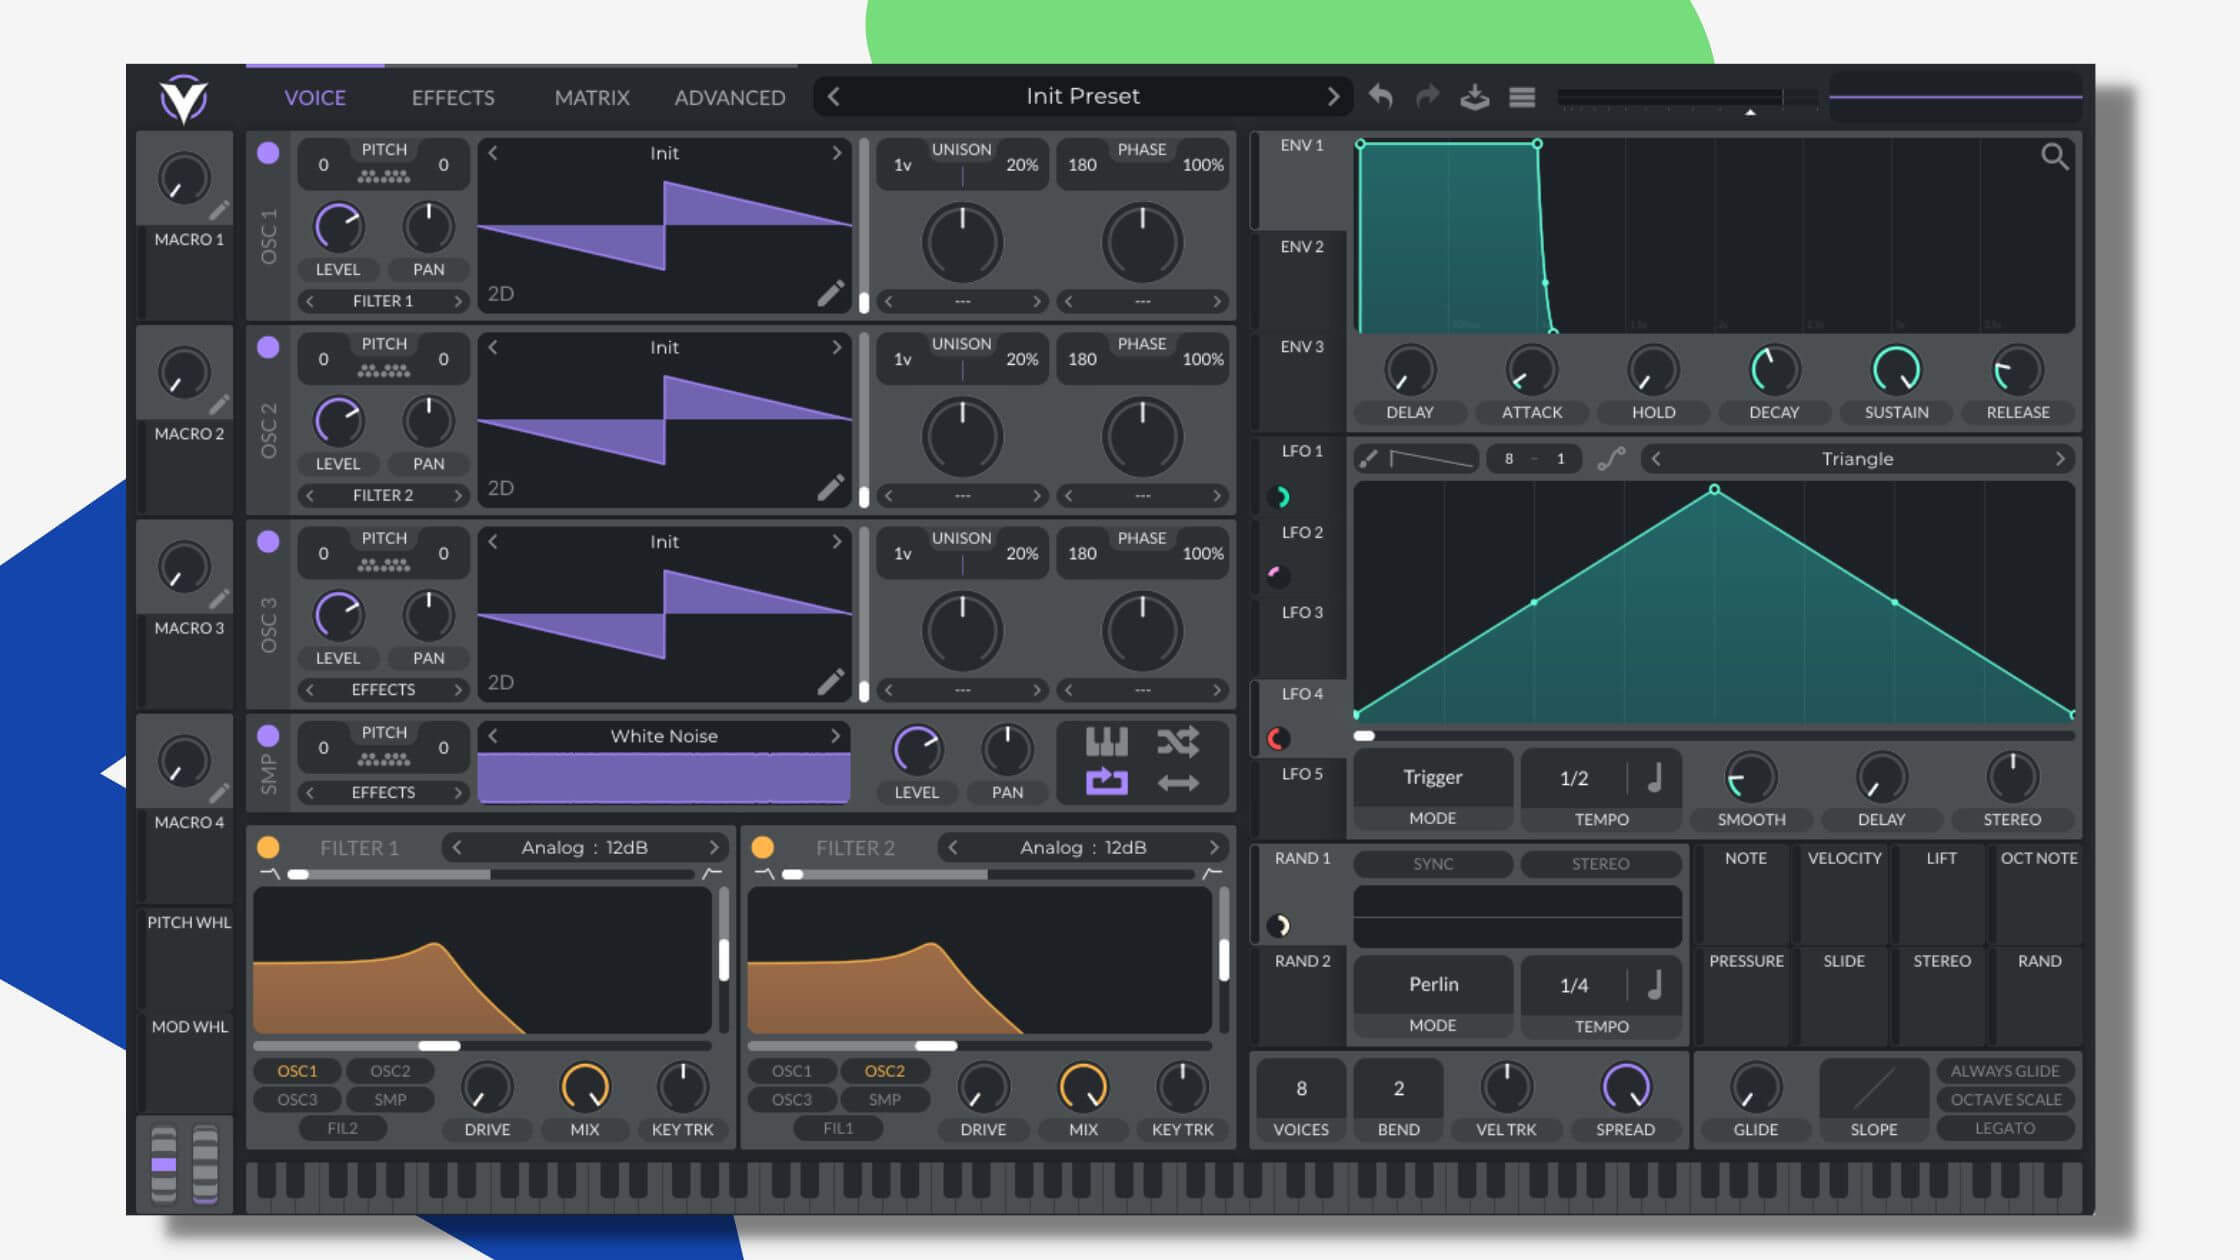 Review: Vital by Matt Tytel – the most powerful free soft synth to date?